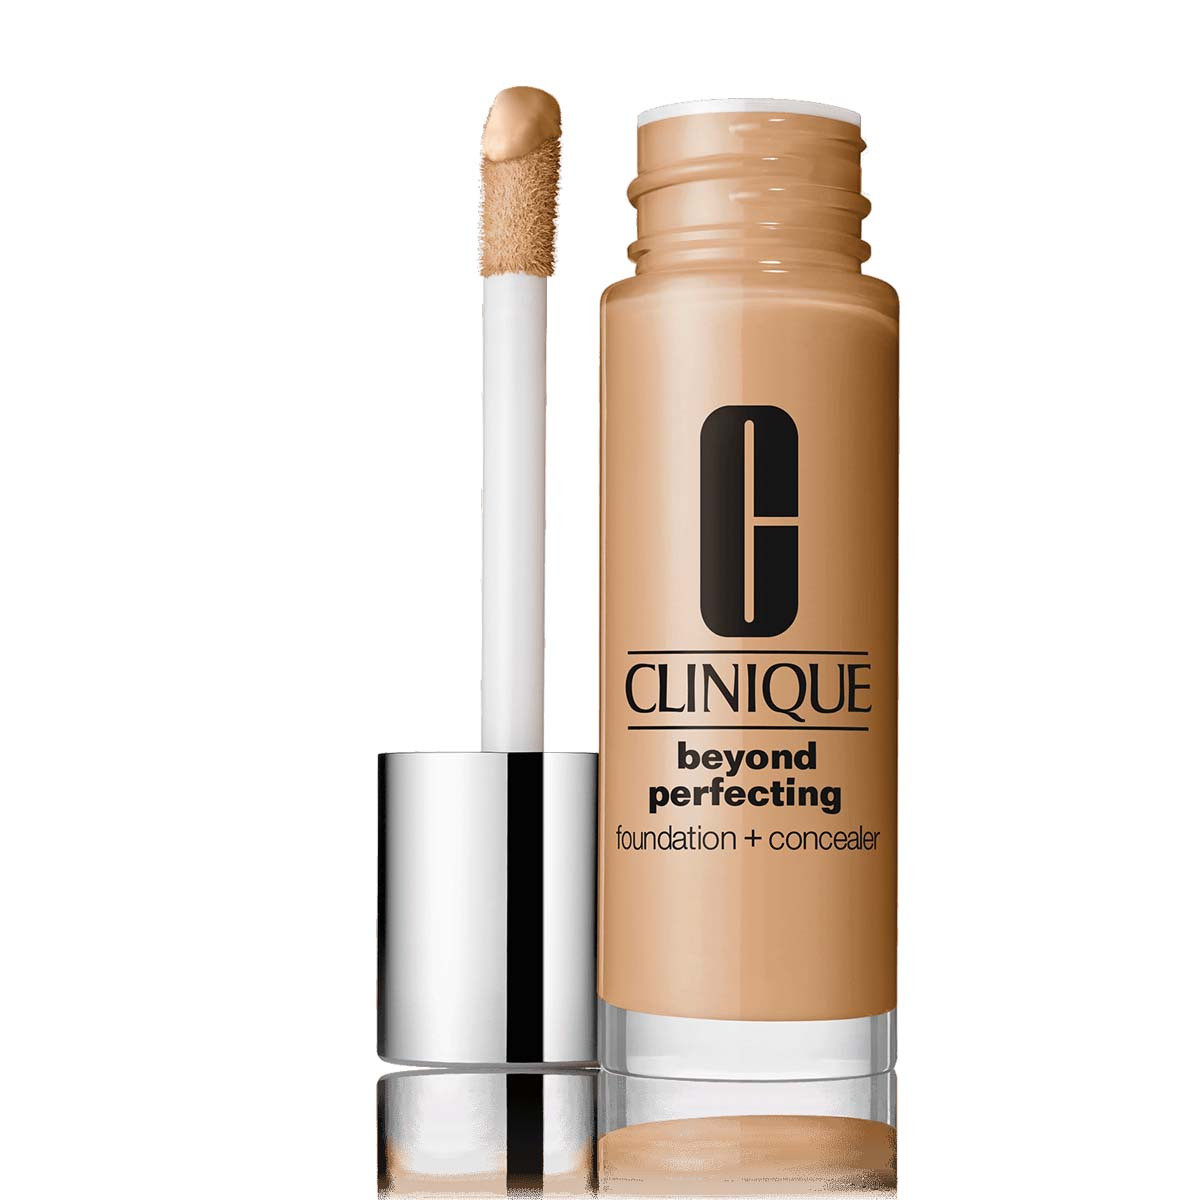 Clinique beyond perfecting foundation - cn 58 honey  30 ml, CN 58 HONEY, large image number 0